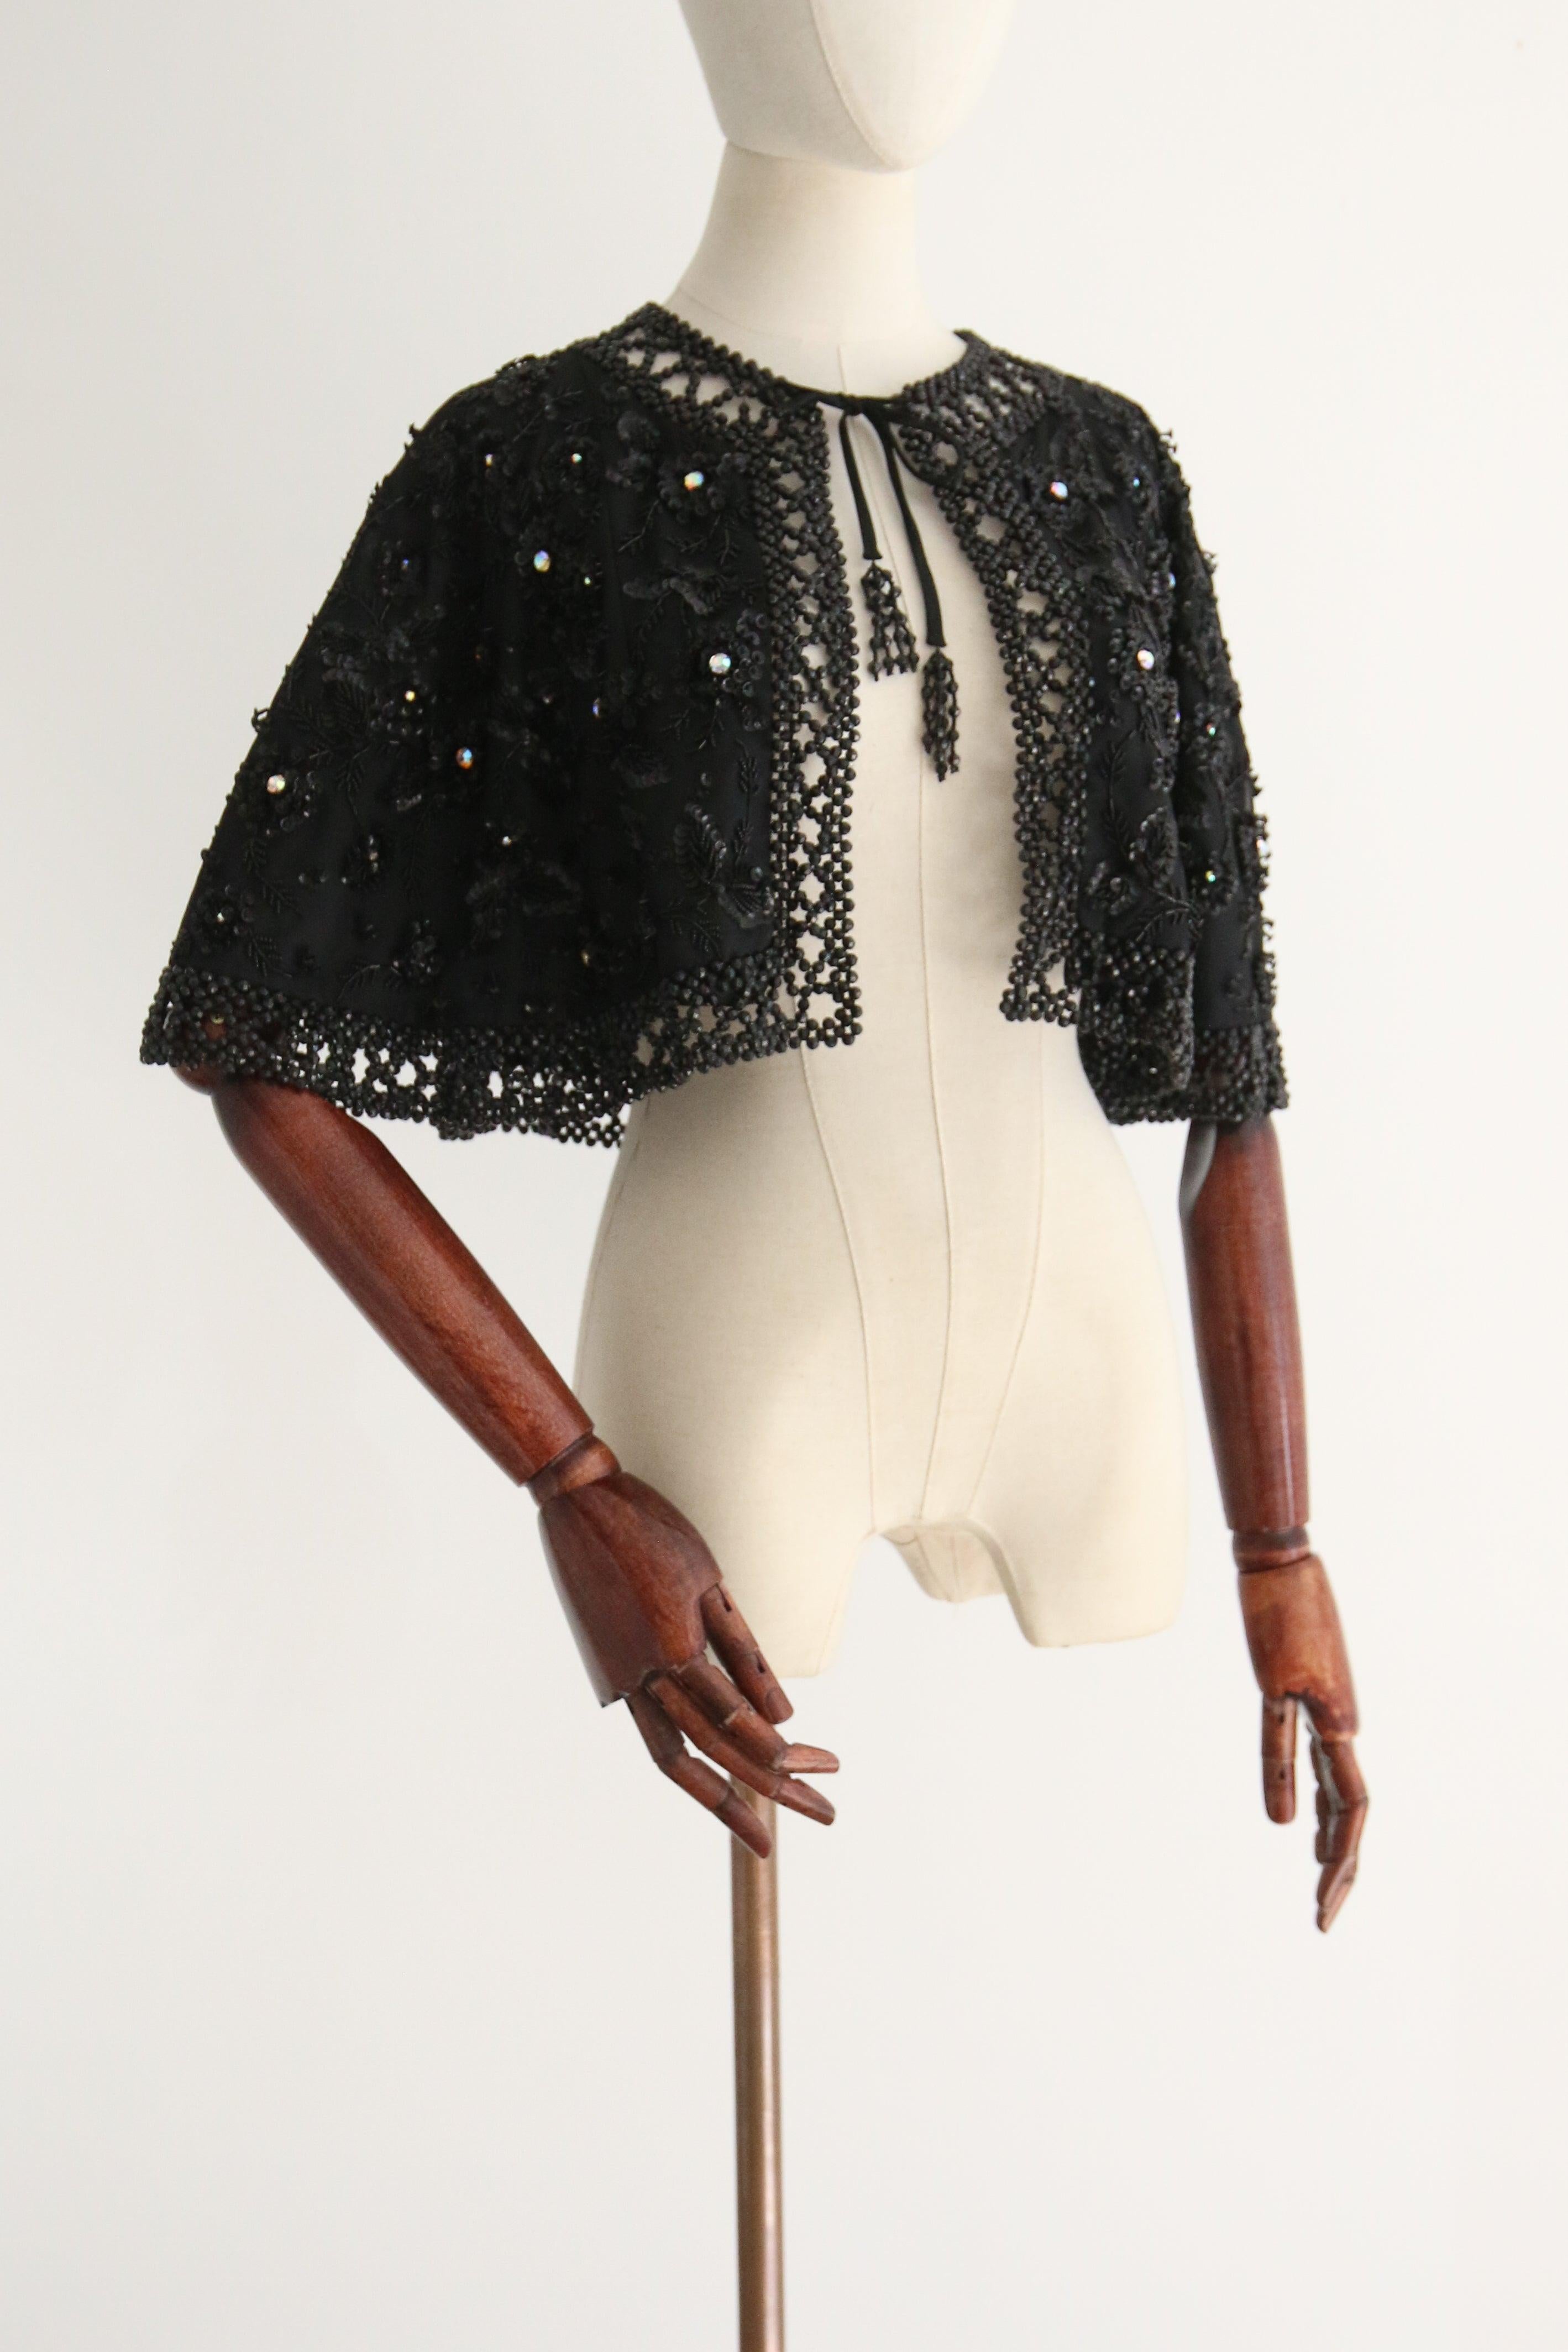 Vintage 1960's Black Beaded and Rhinestone Floral Evening Cape For Sale 3